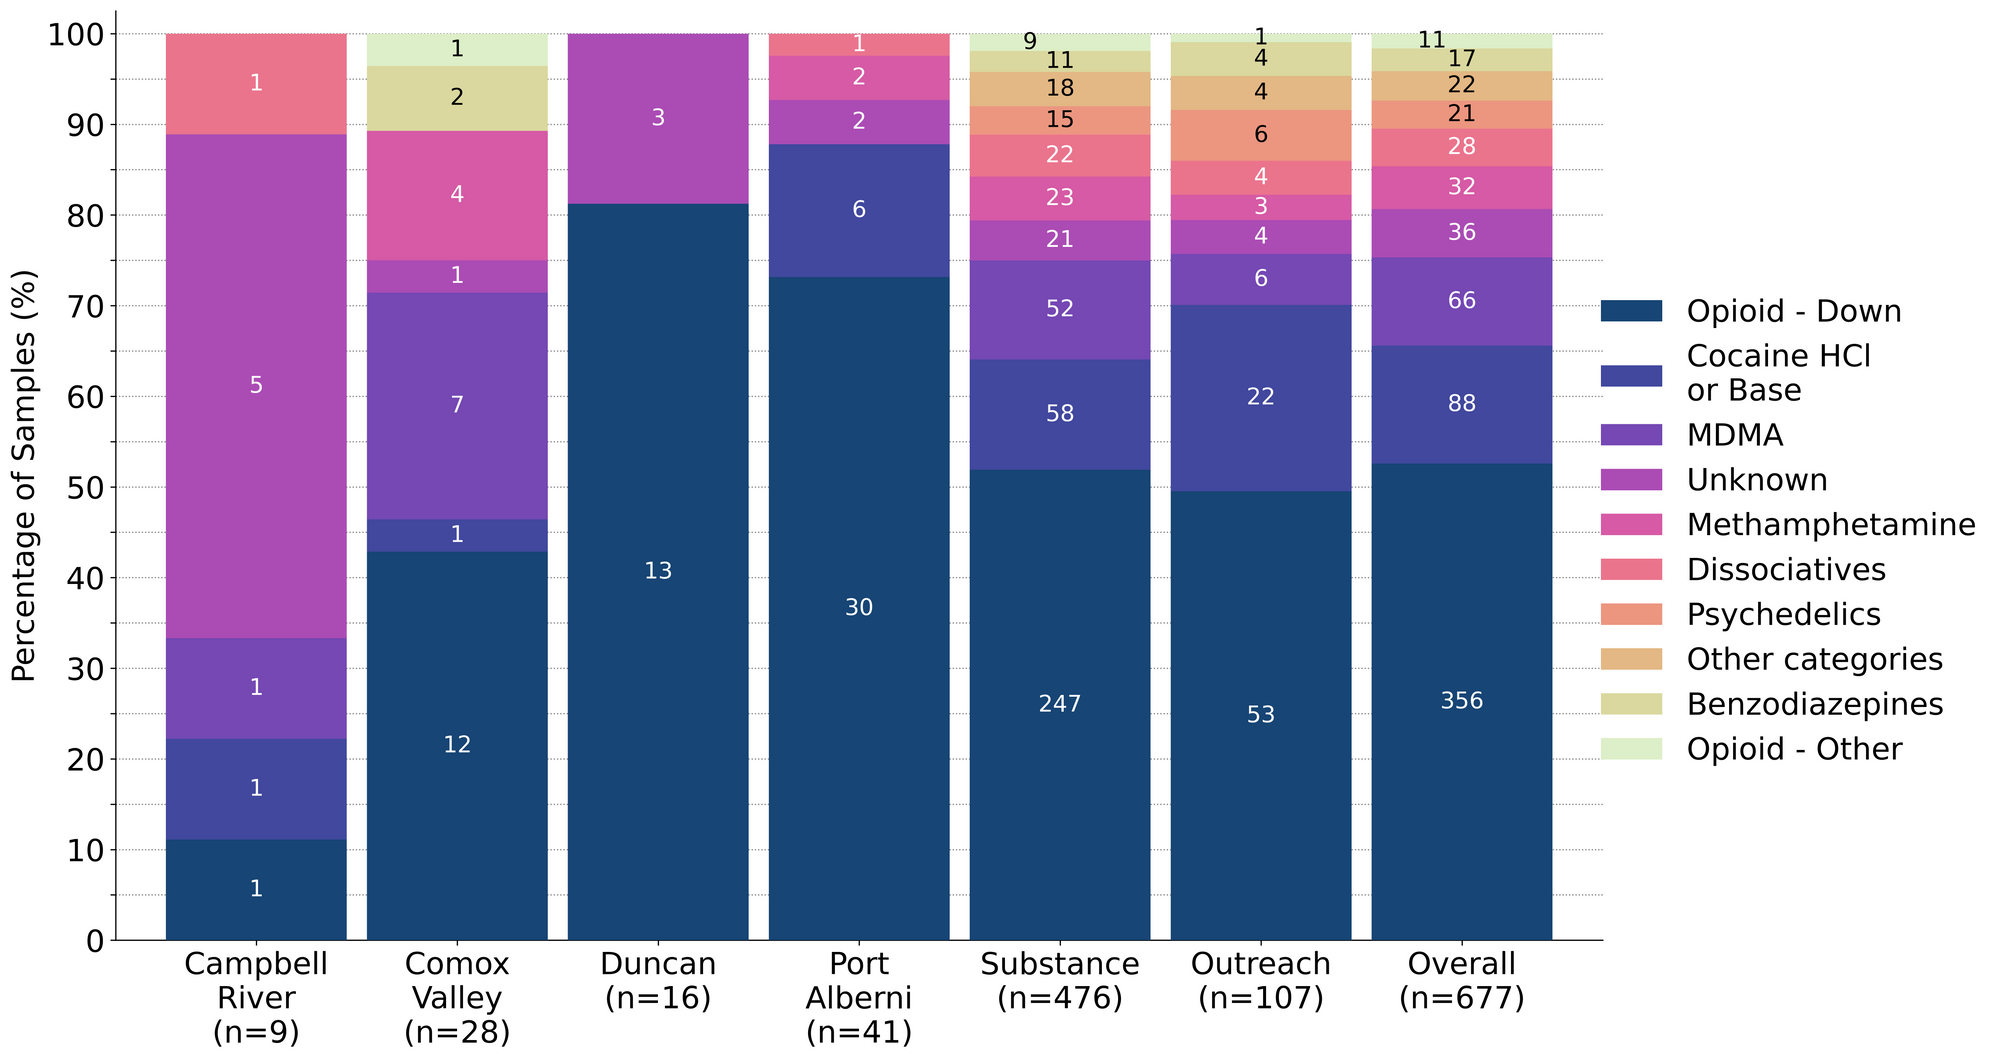 Figure 1. Prevalence of drug classes checked during February split by sample collection/method. Bars are stacked by the percentage of samples in each drug class, with the individual sample counts overlaid. 